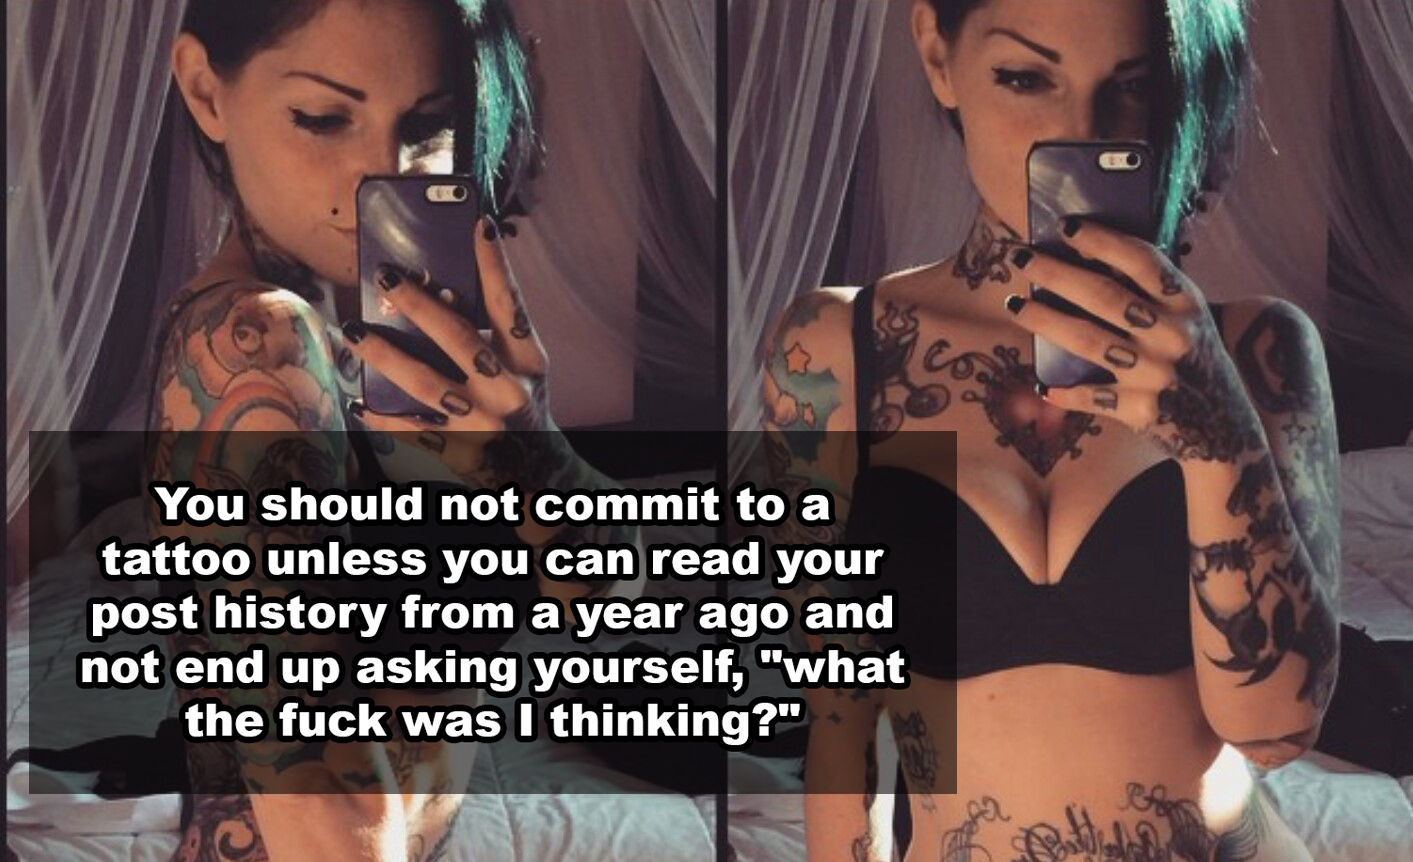 You should not commit to a tattoo unless you can read your post history from a year ago and not end up asking yourself, "what the fuck was I thinking?"